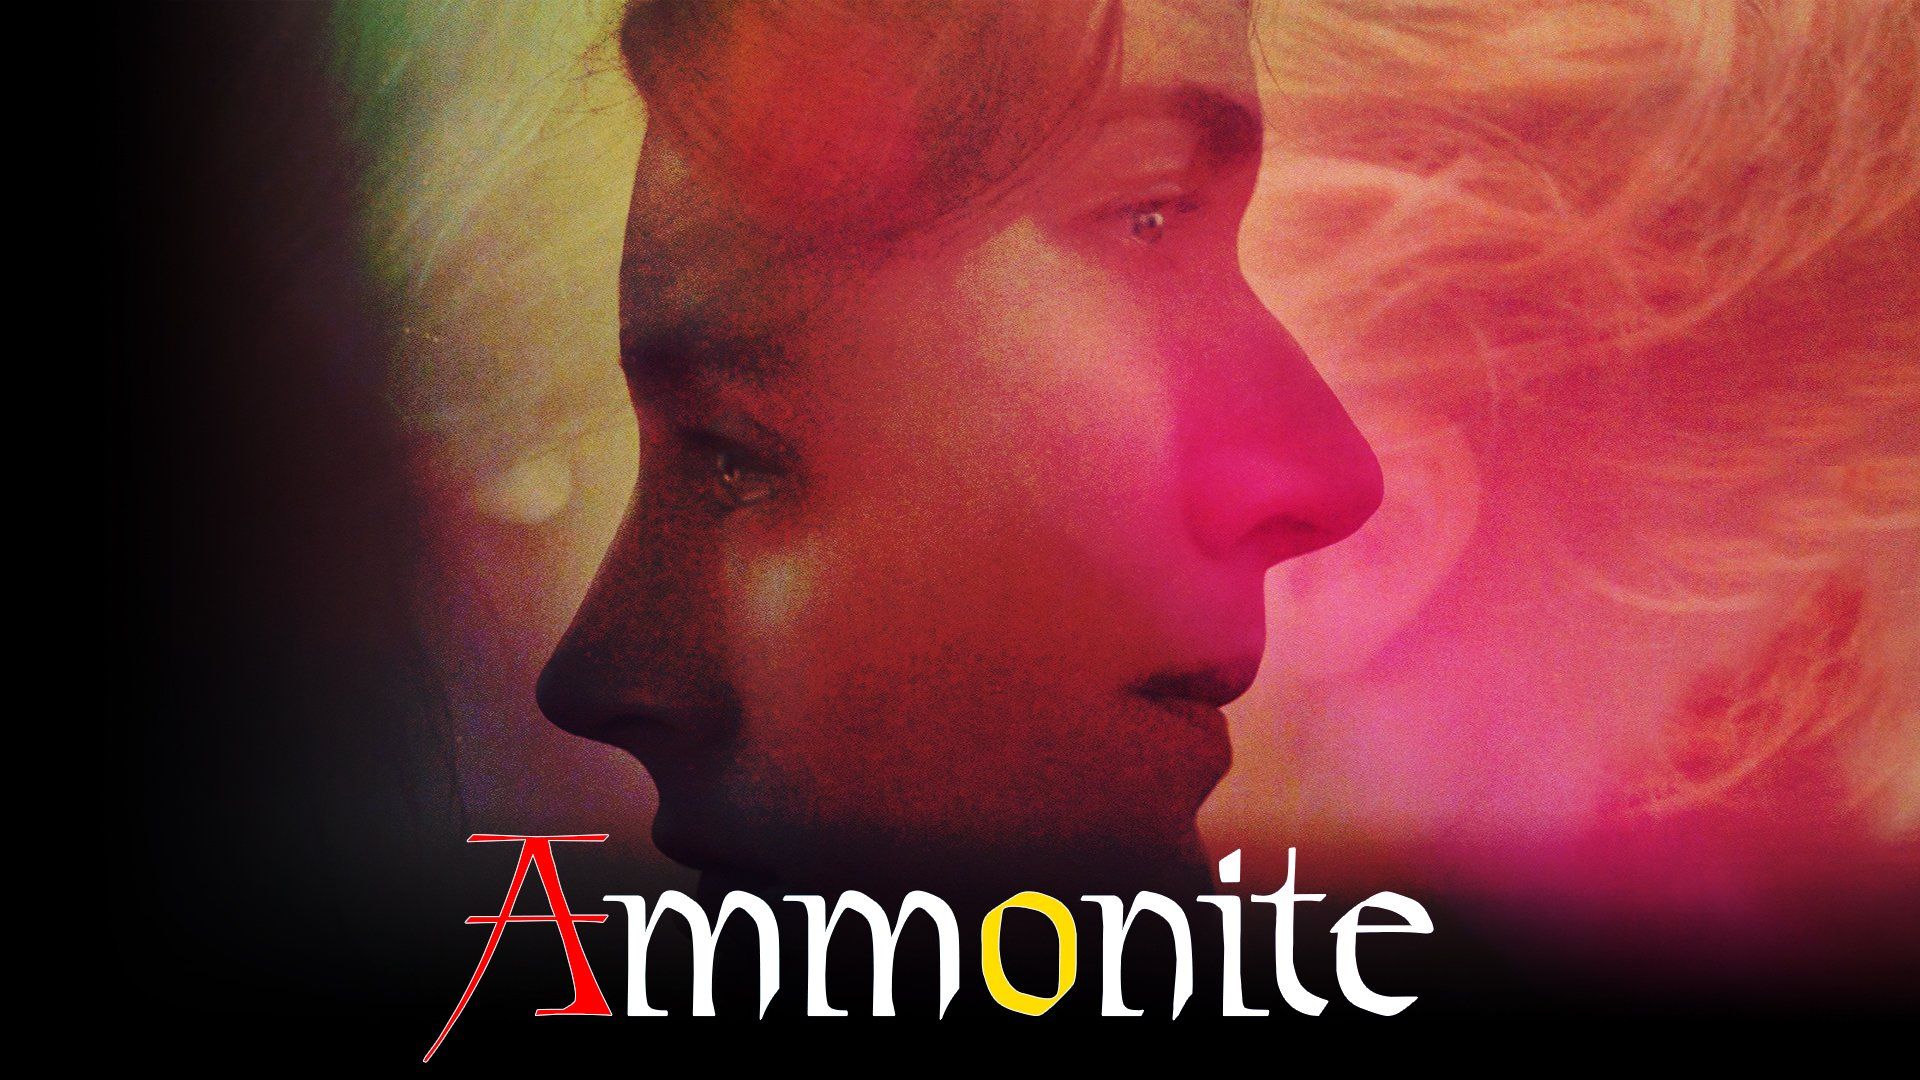 Ammonite: Set To Be Released In The US!, Premiere Details, and Many